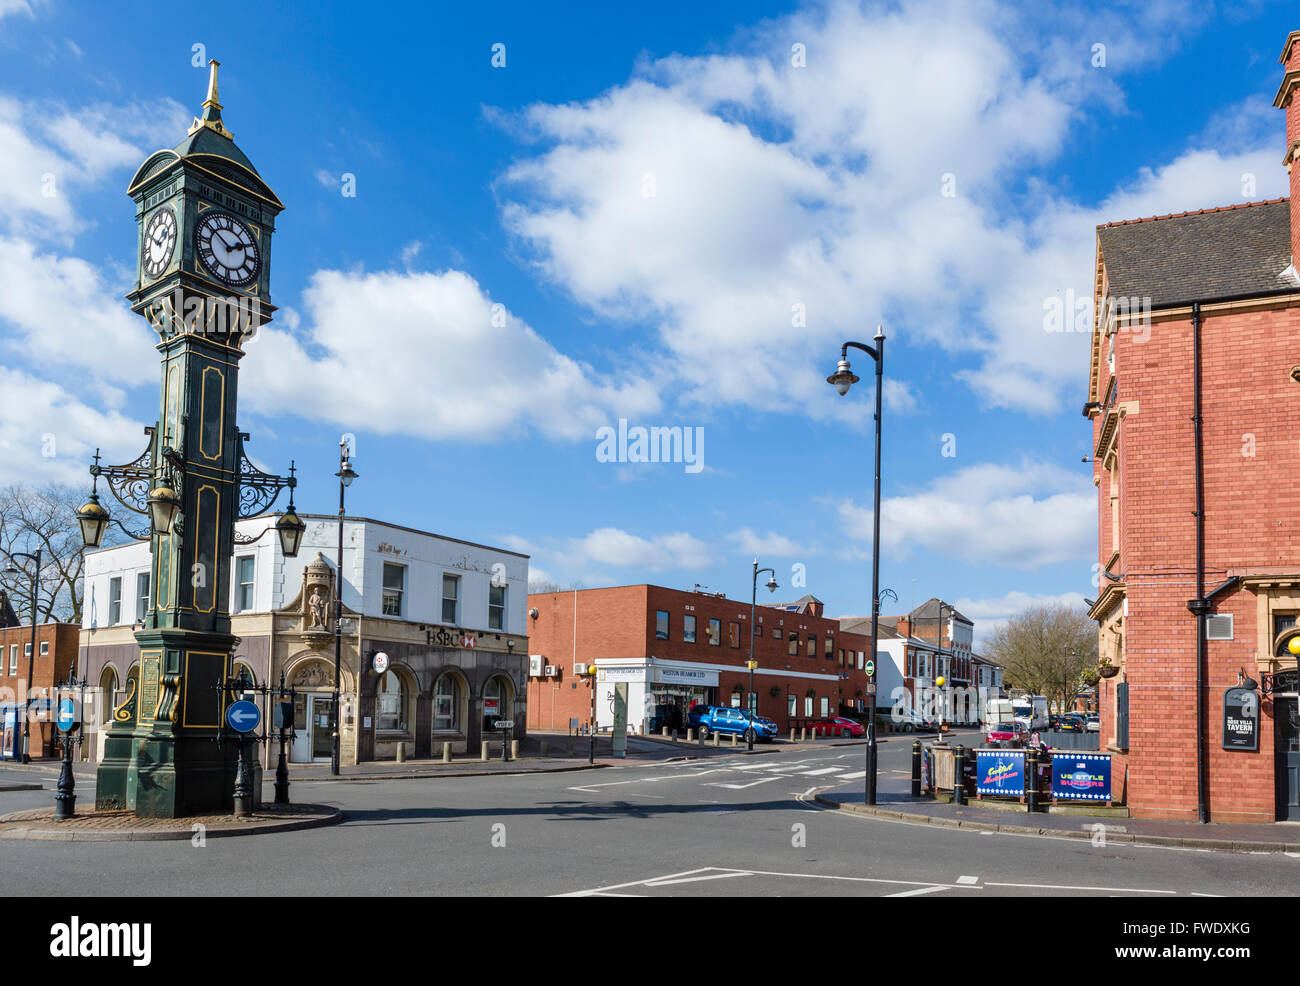 The Chamberlain Clock in the centre of the Jewellery Quarter, Birmingham, West Midlands, England, UK Stock Photo